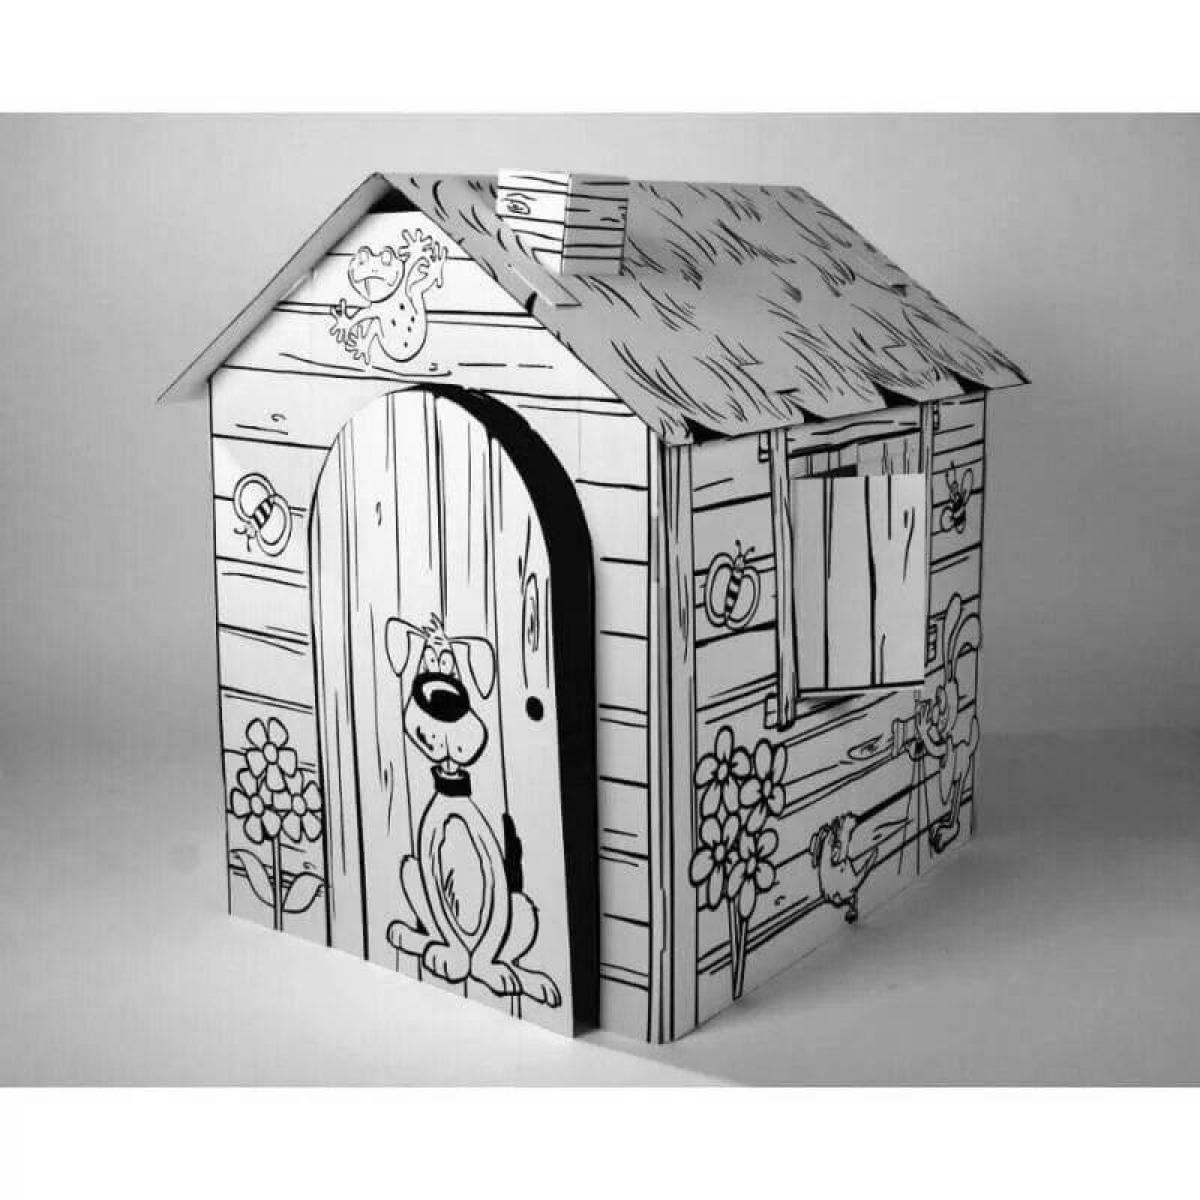 Playful cardboard house coloring page